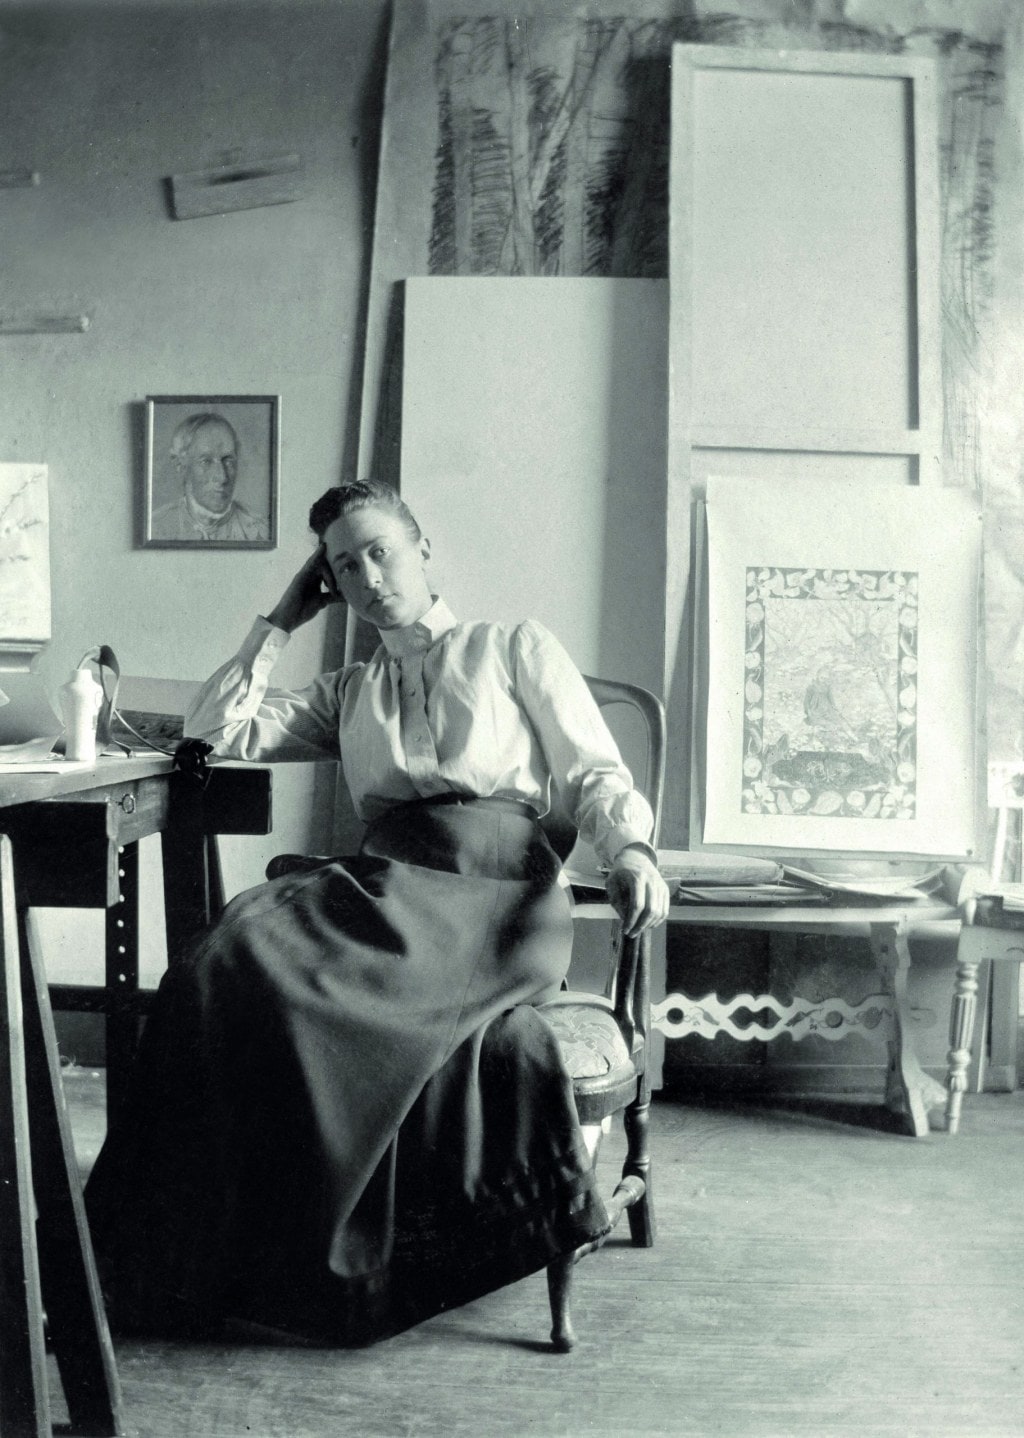 Black and white image of Hilma af Klint sitting in a chair in an art studio